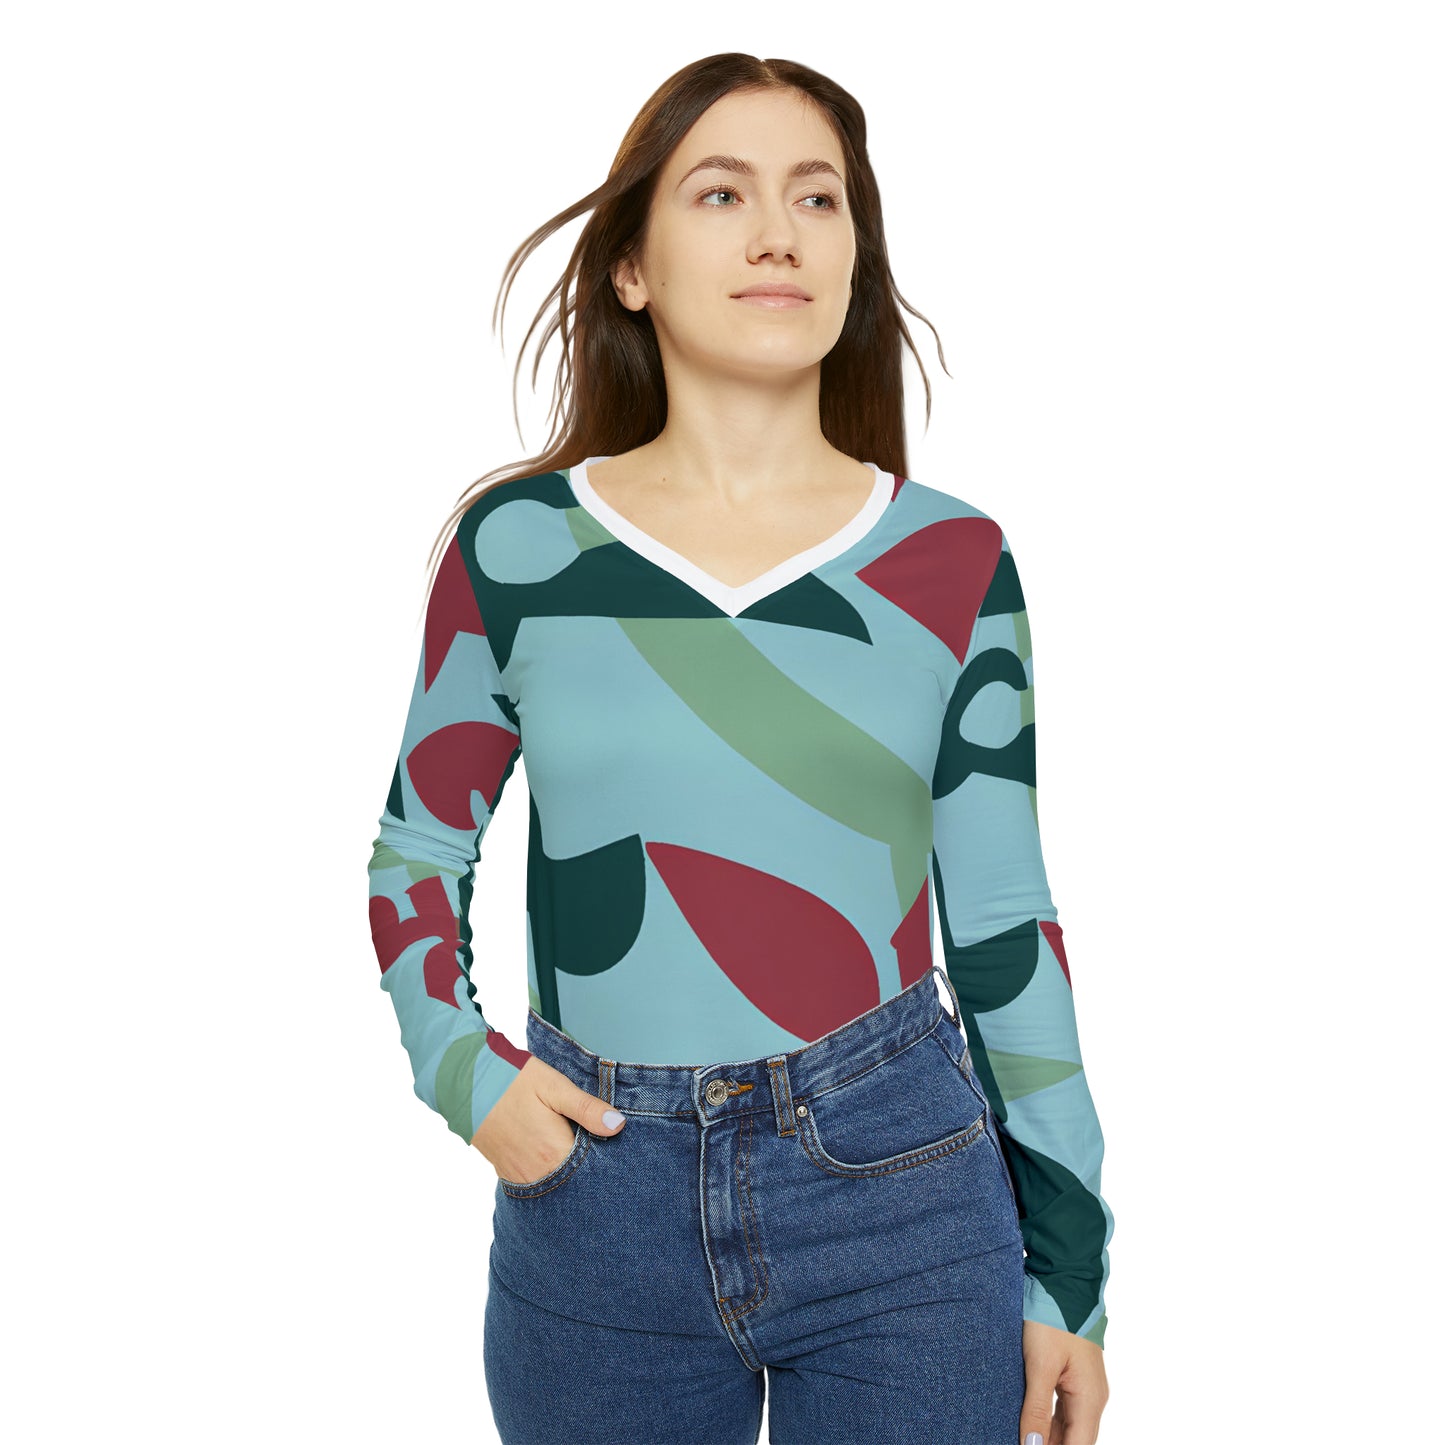 Chaparral Ione - Women's Long-Sleeve V-neck Shirt